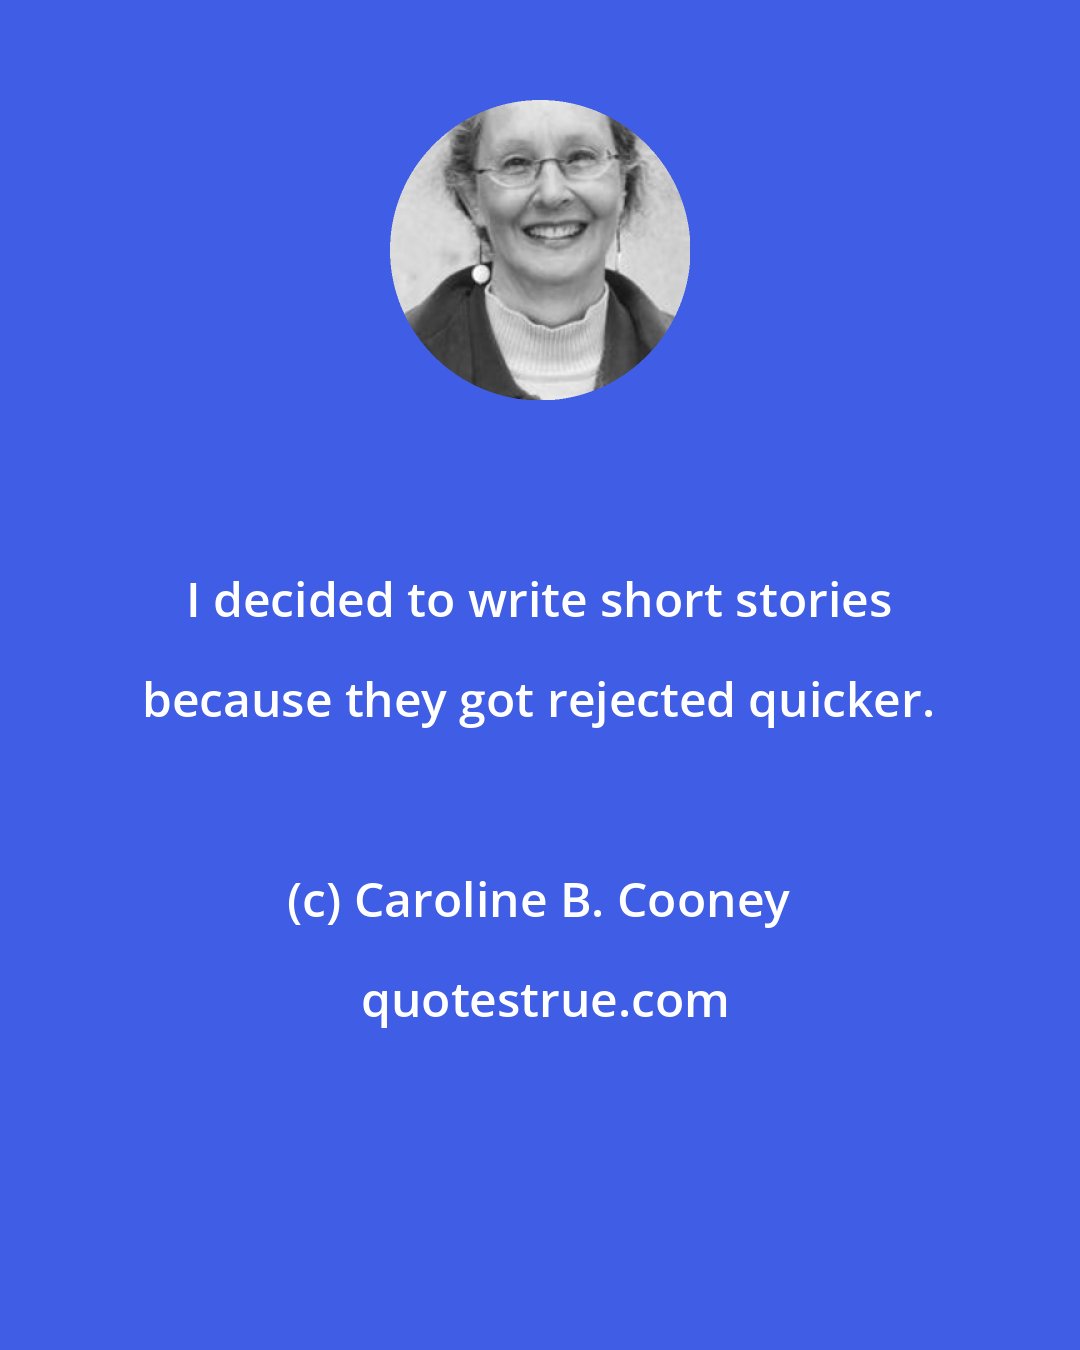 Caroline B. Cooney: I decided to write short stories because they got rejected quicker.